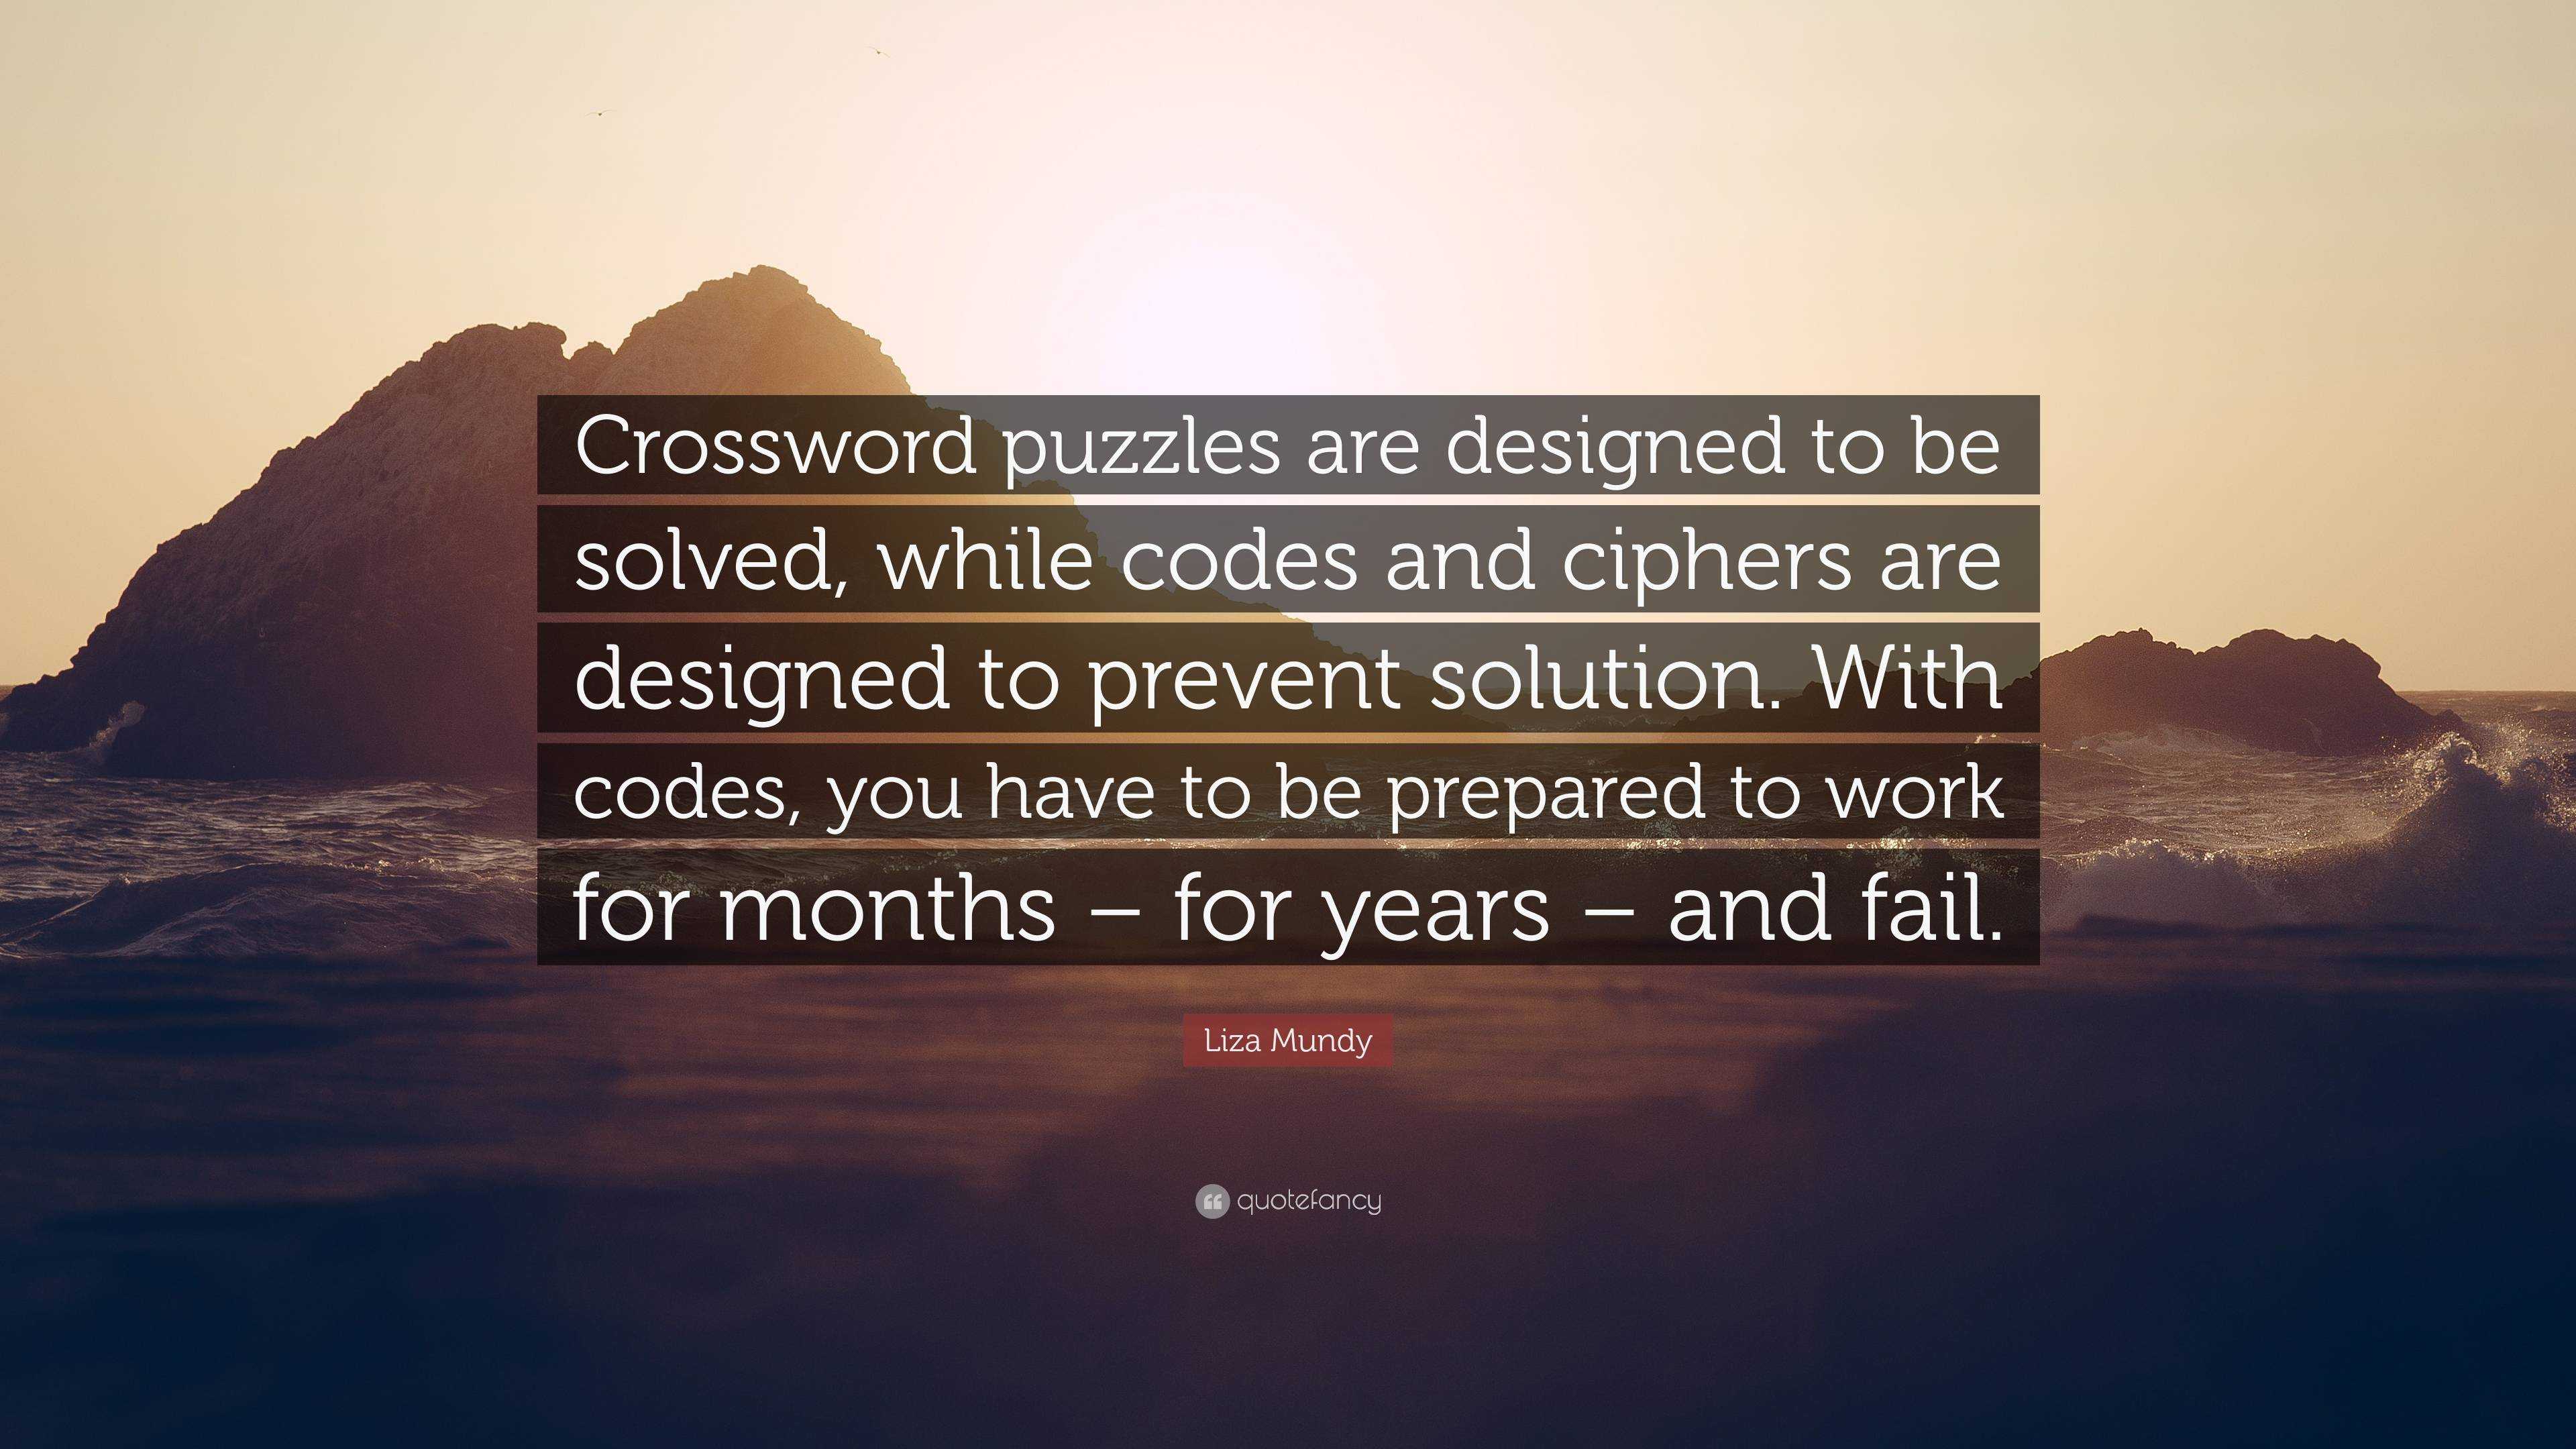 Liza Mundy Quote Crossword Puzzles Are Designed To Be Solved While Codes And Ciphers Are Designed To Prevent Solution With Codes You H